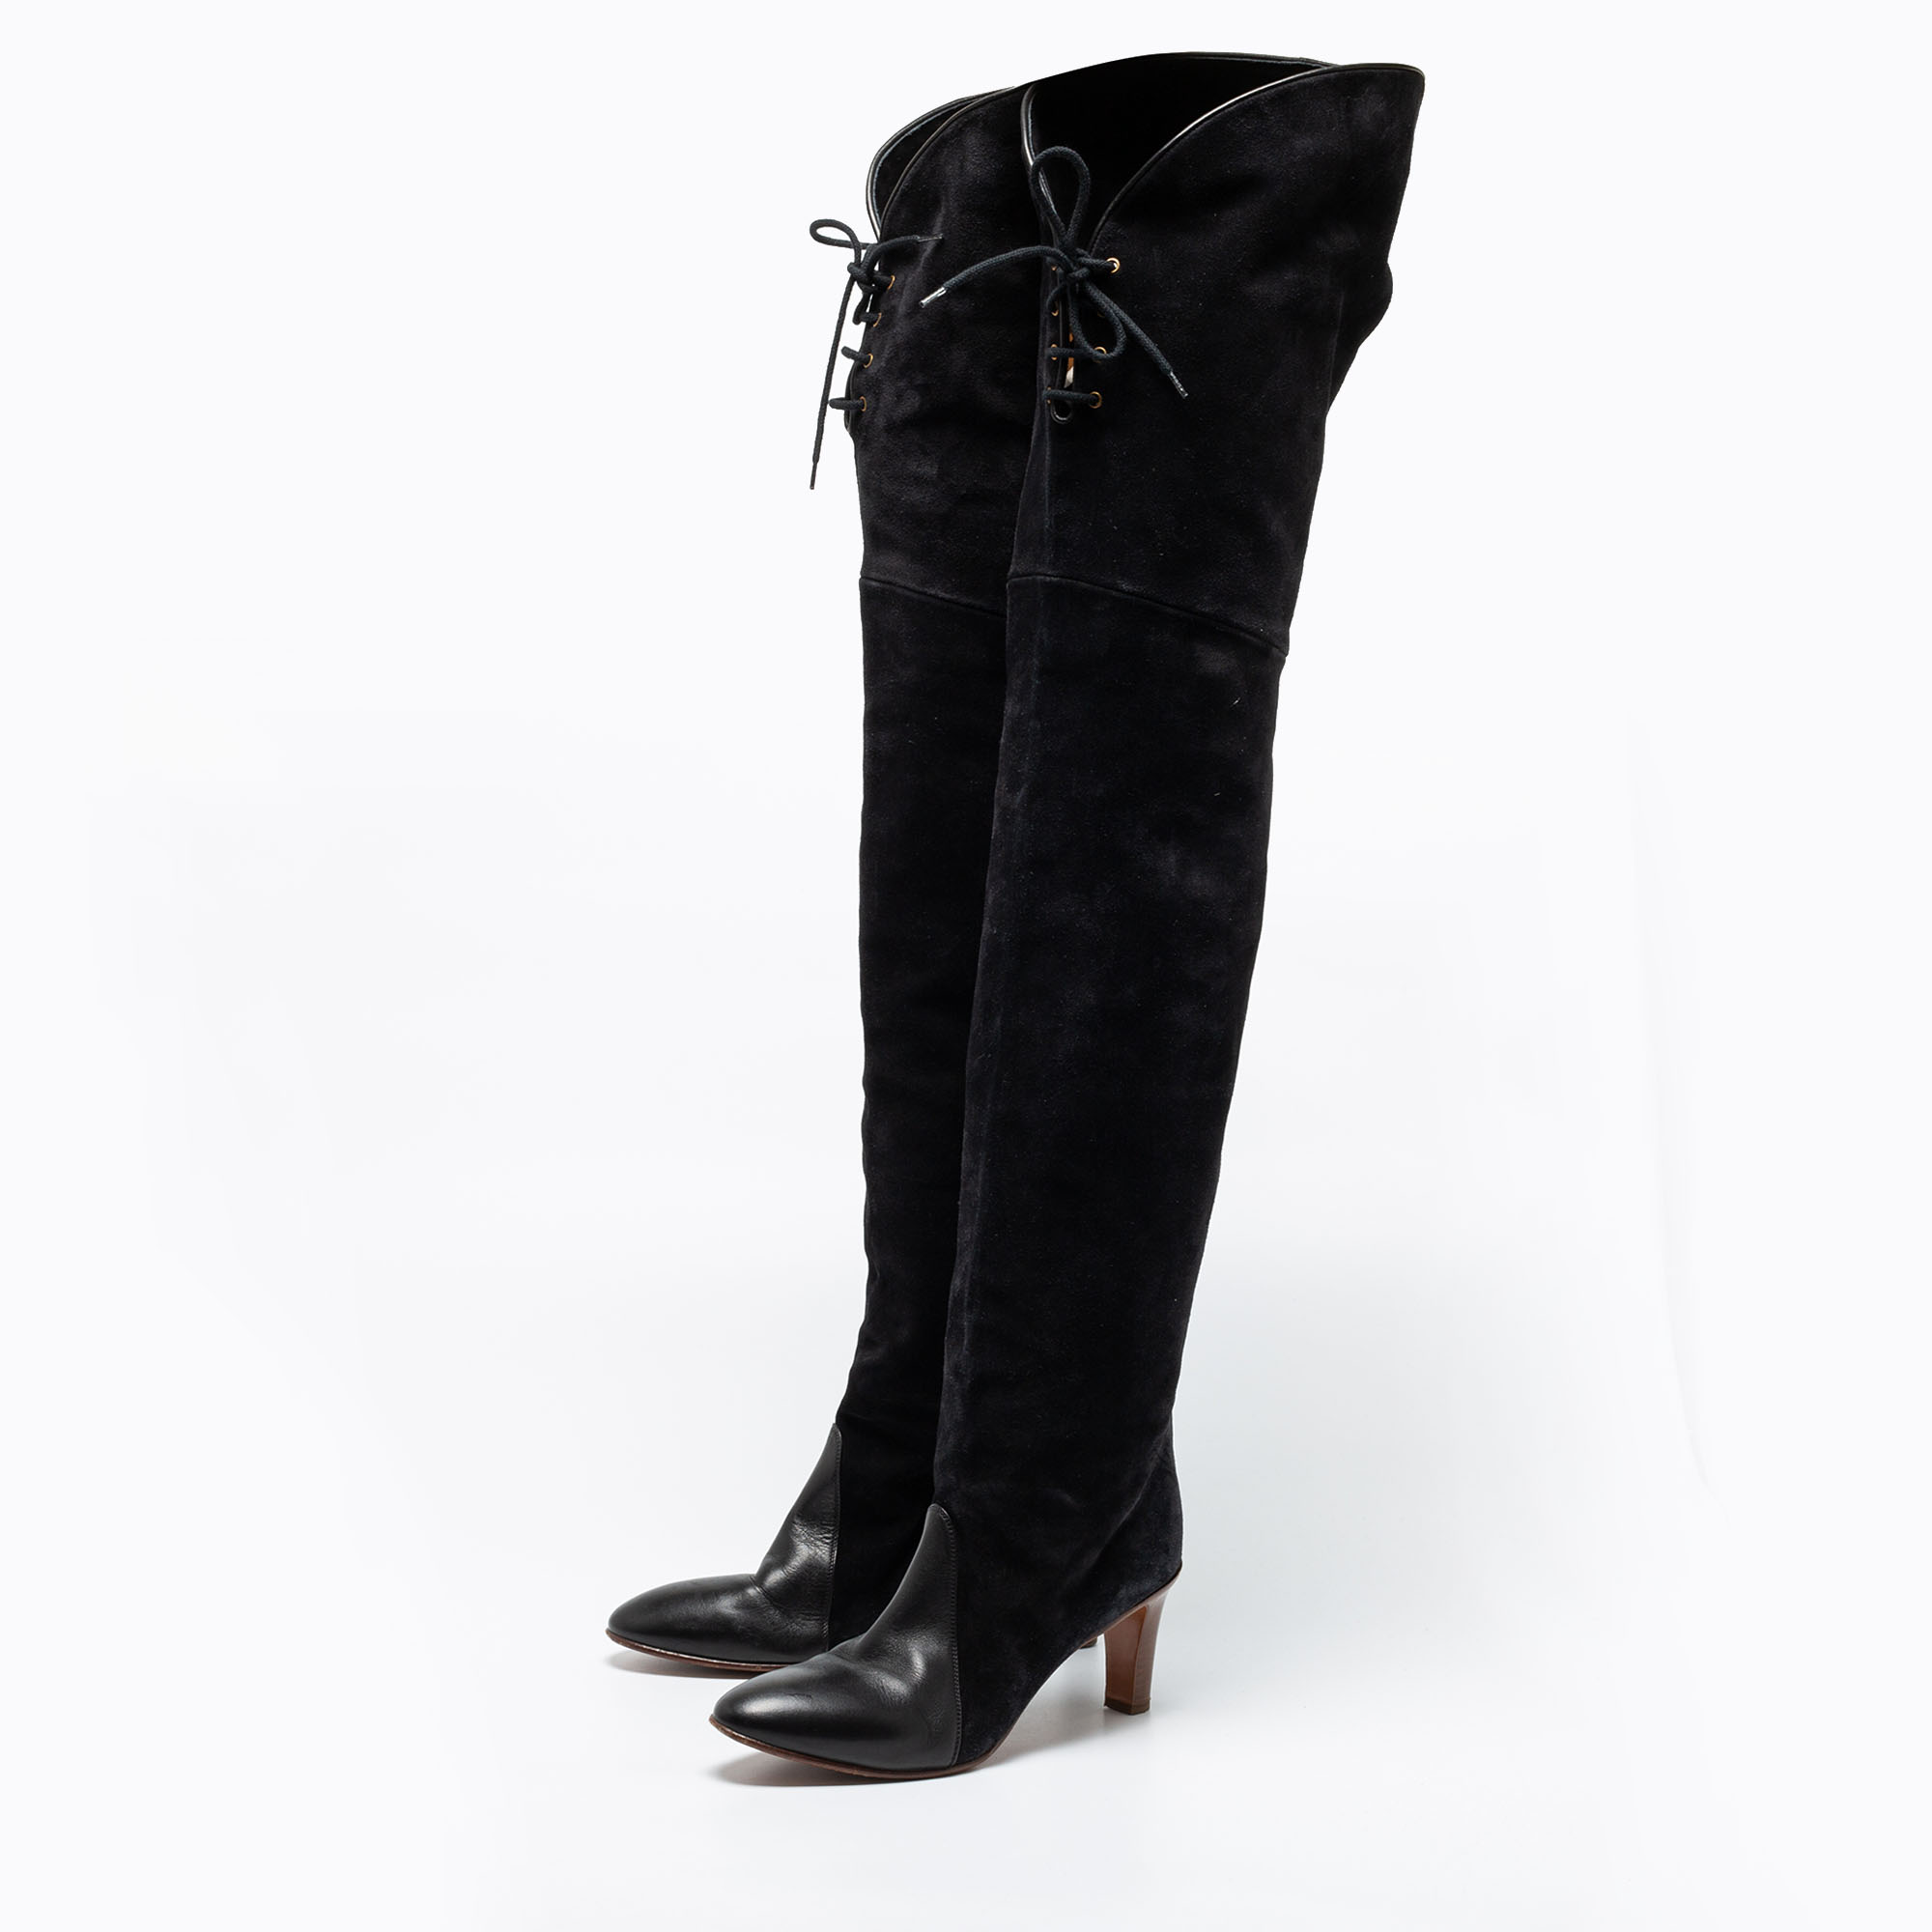 Chloe Black Suede And Leather Thigh Length Boots Size